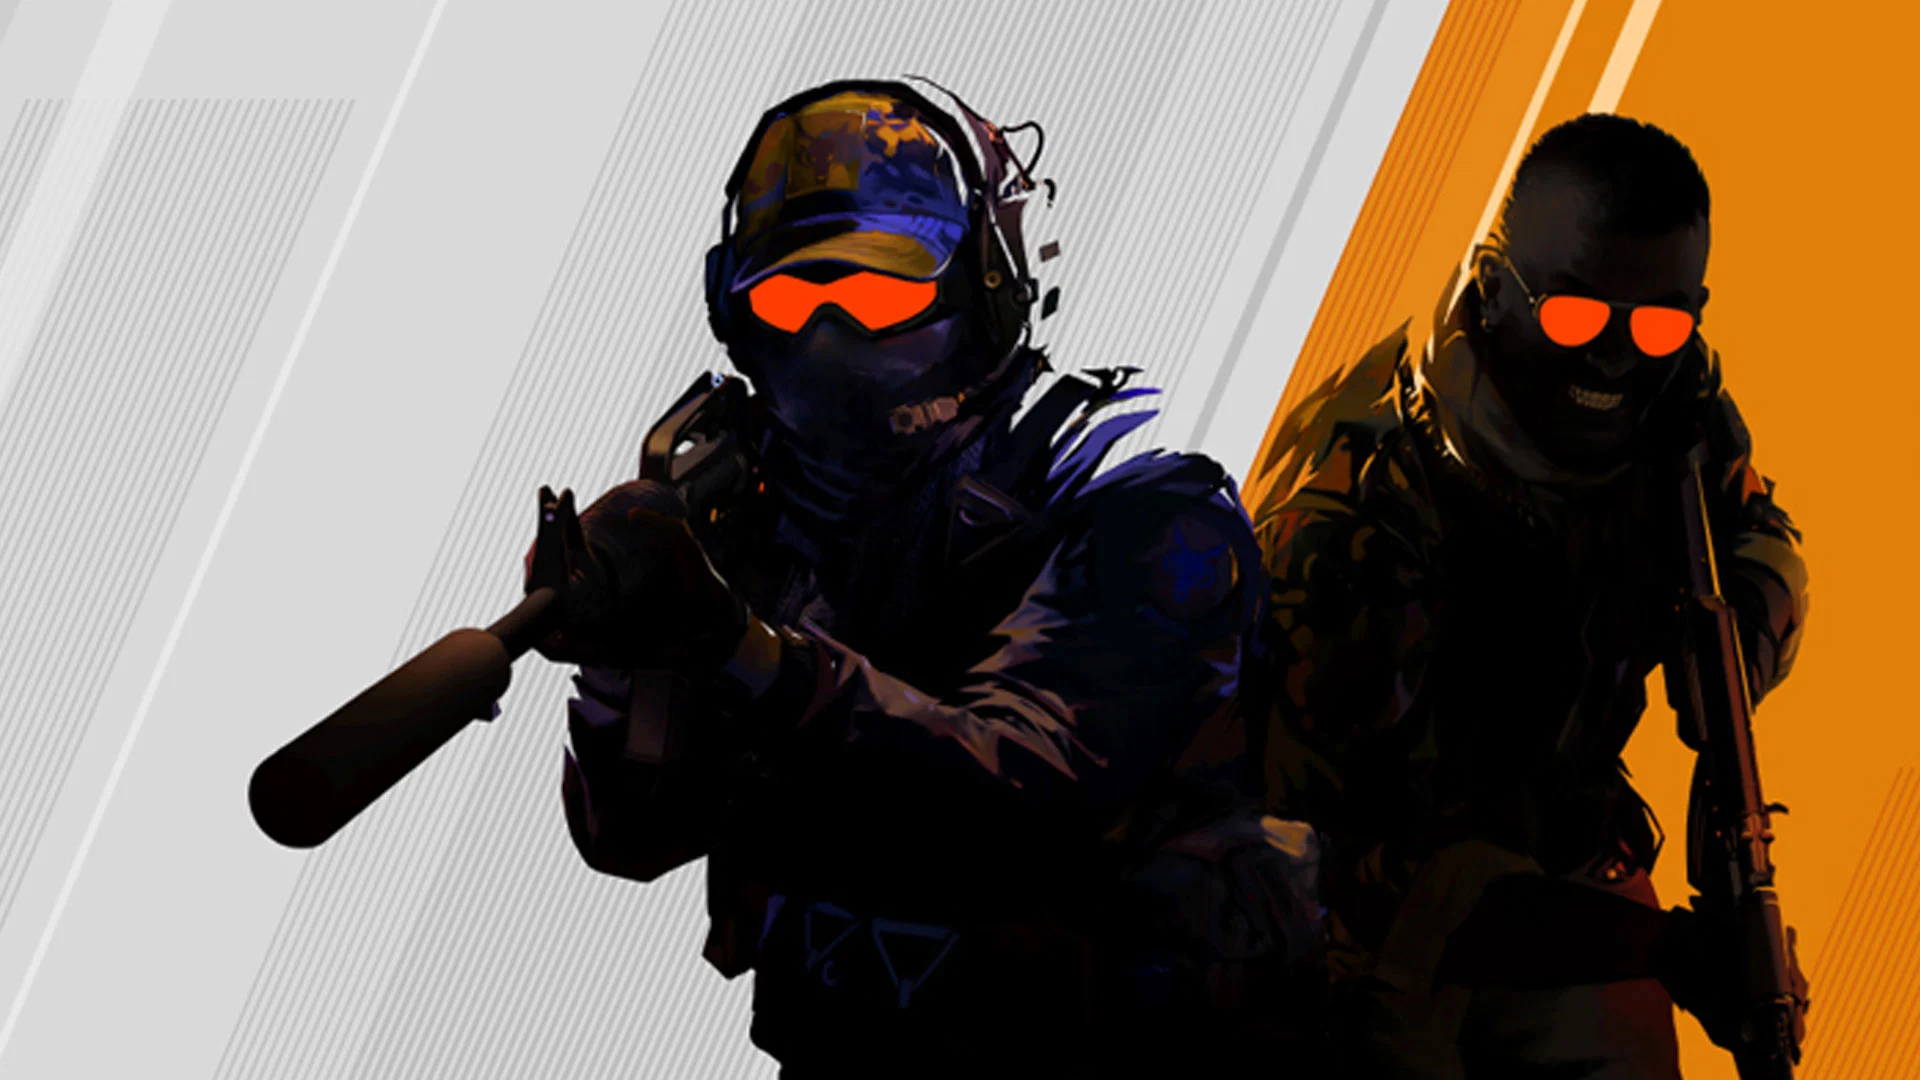 Why Are So Many People Playing Counter-Strike?